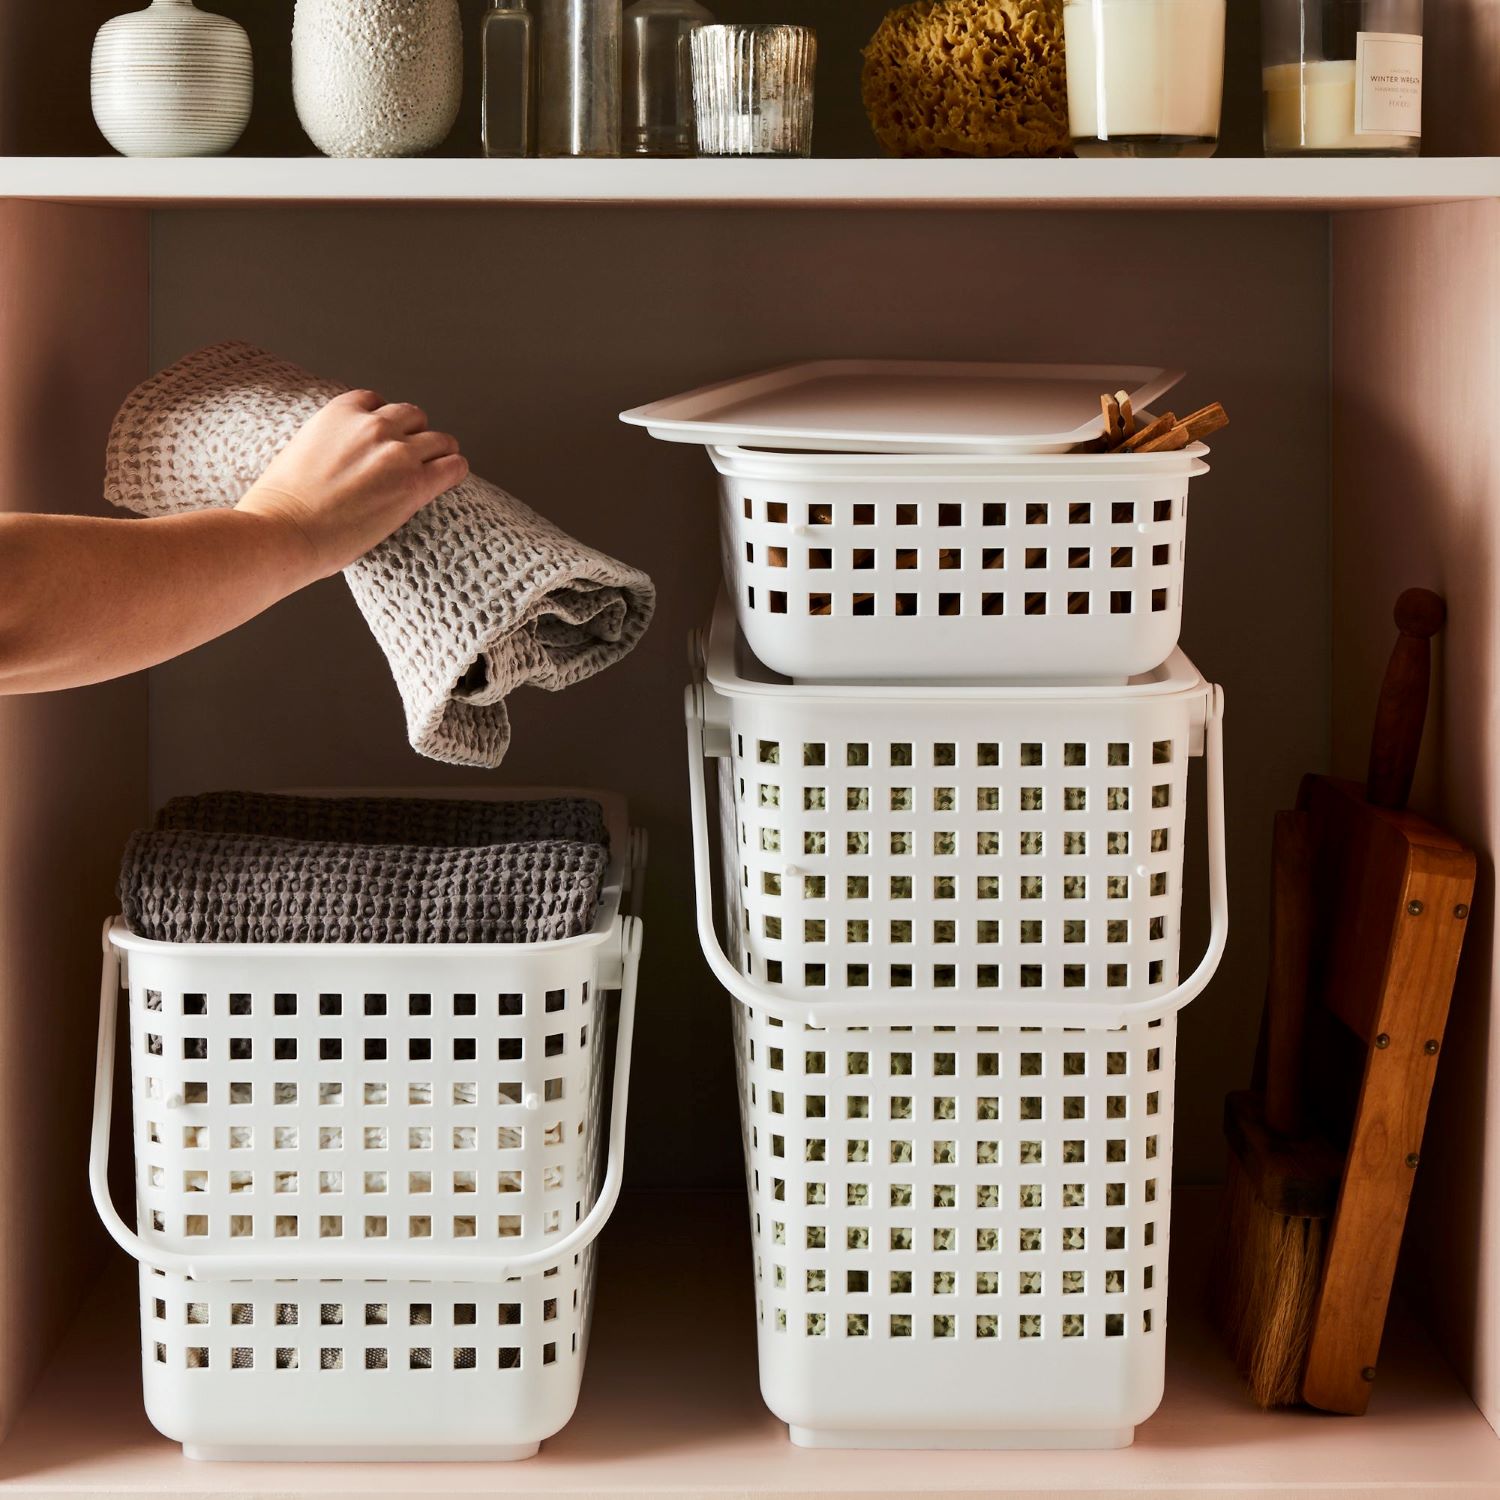 10 Best Stackable Baskets for 2023